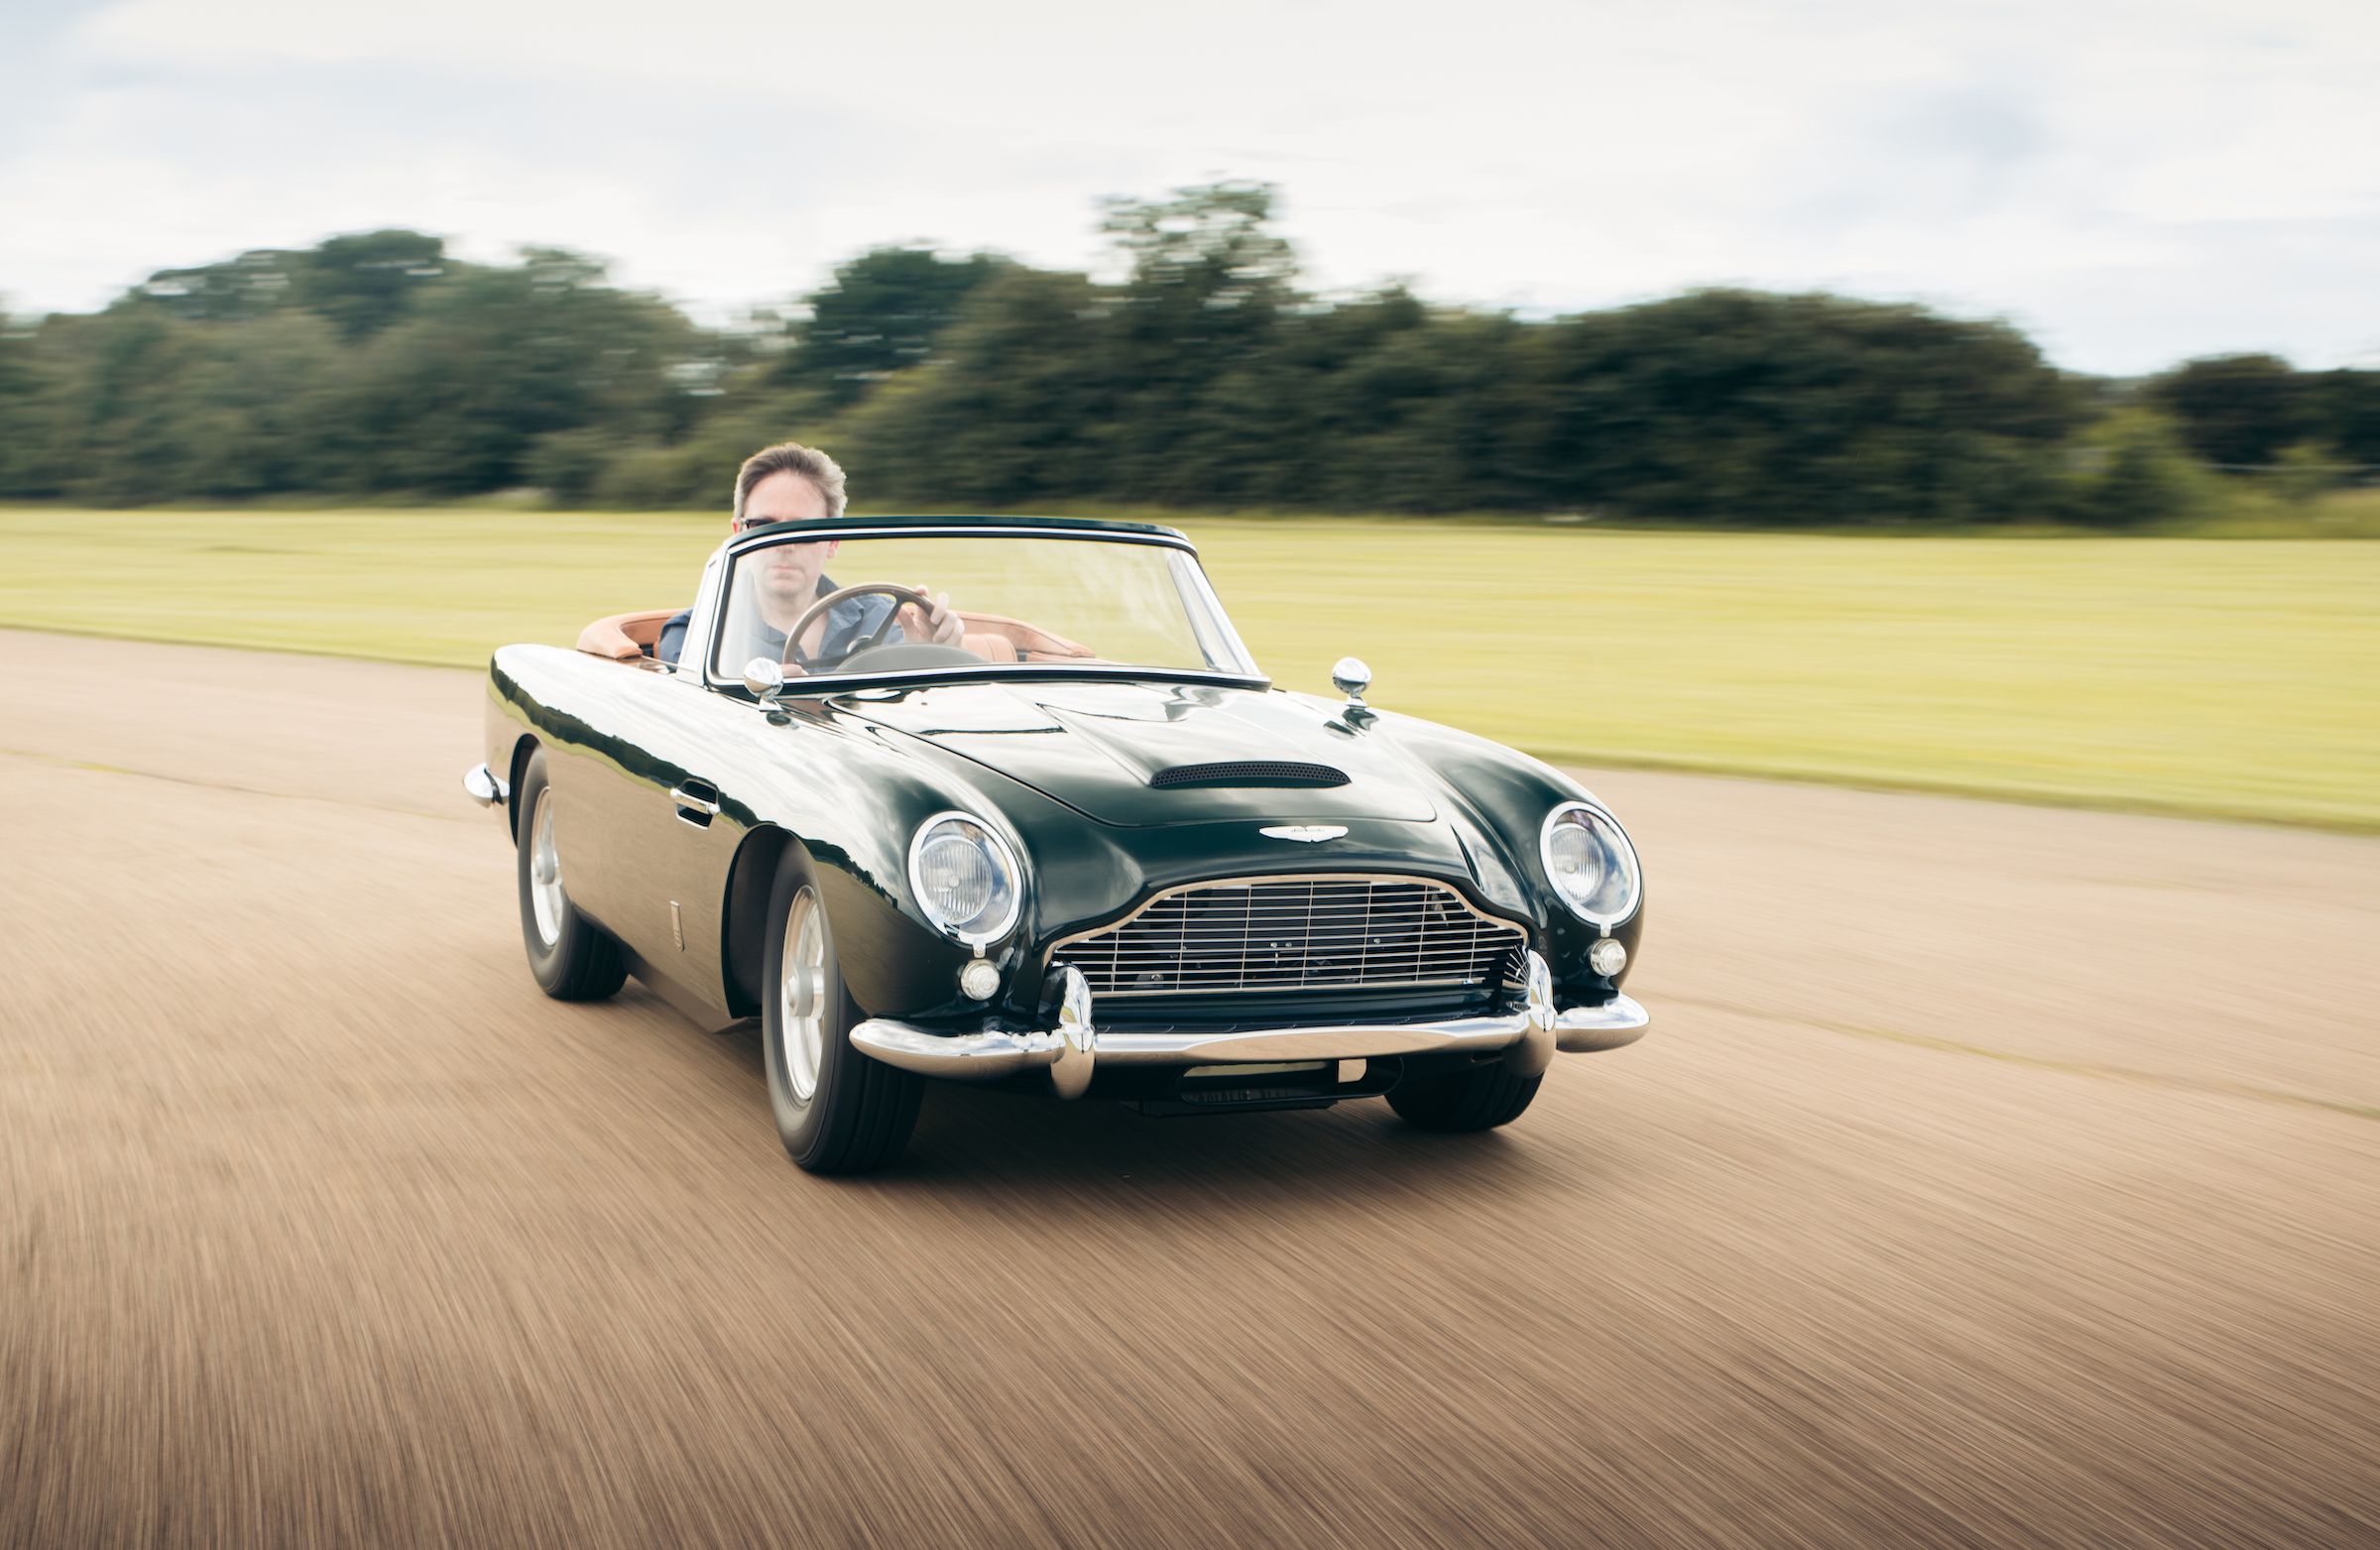 Baby you can drive my car: Flat-out and fearless in Little Car Company’s Aston Martin DB5 Junior